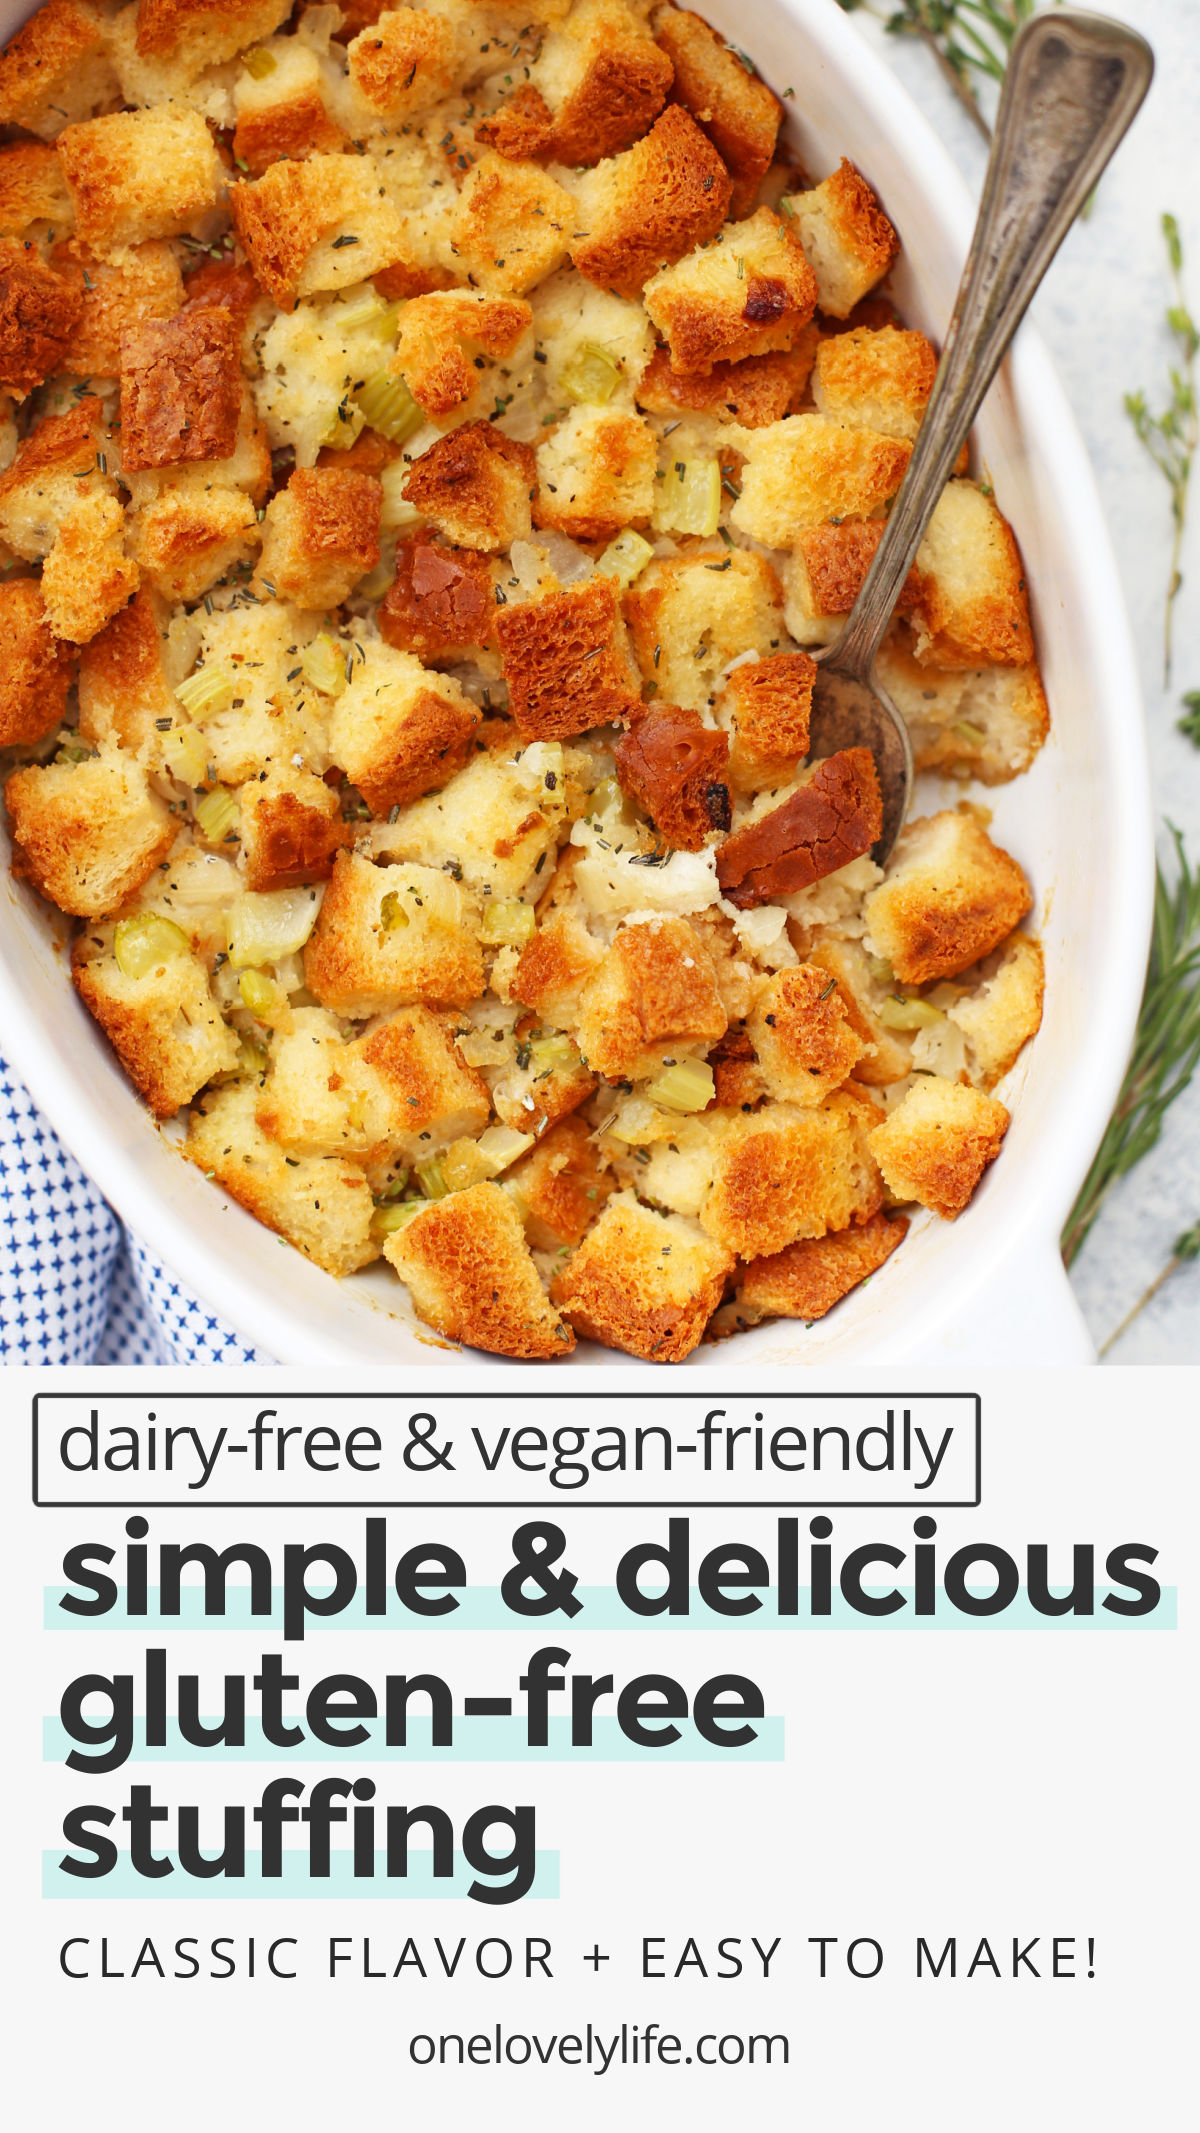 Classic Gluten-Free Stuffing (or Dressing!) - With cozy homestyle flavors and an amazing texture, this is THE gluten-free stuffing recipe you need for Thanksgiving! (Don't miss all the variation ideas, too!) // Gluten-free thanksgiving // thanksgiving side dishes // holiday side dish // gluten-free dressing #glutenfree #sidedish #thanksgiving